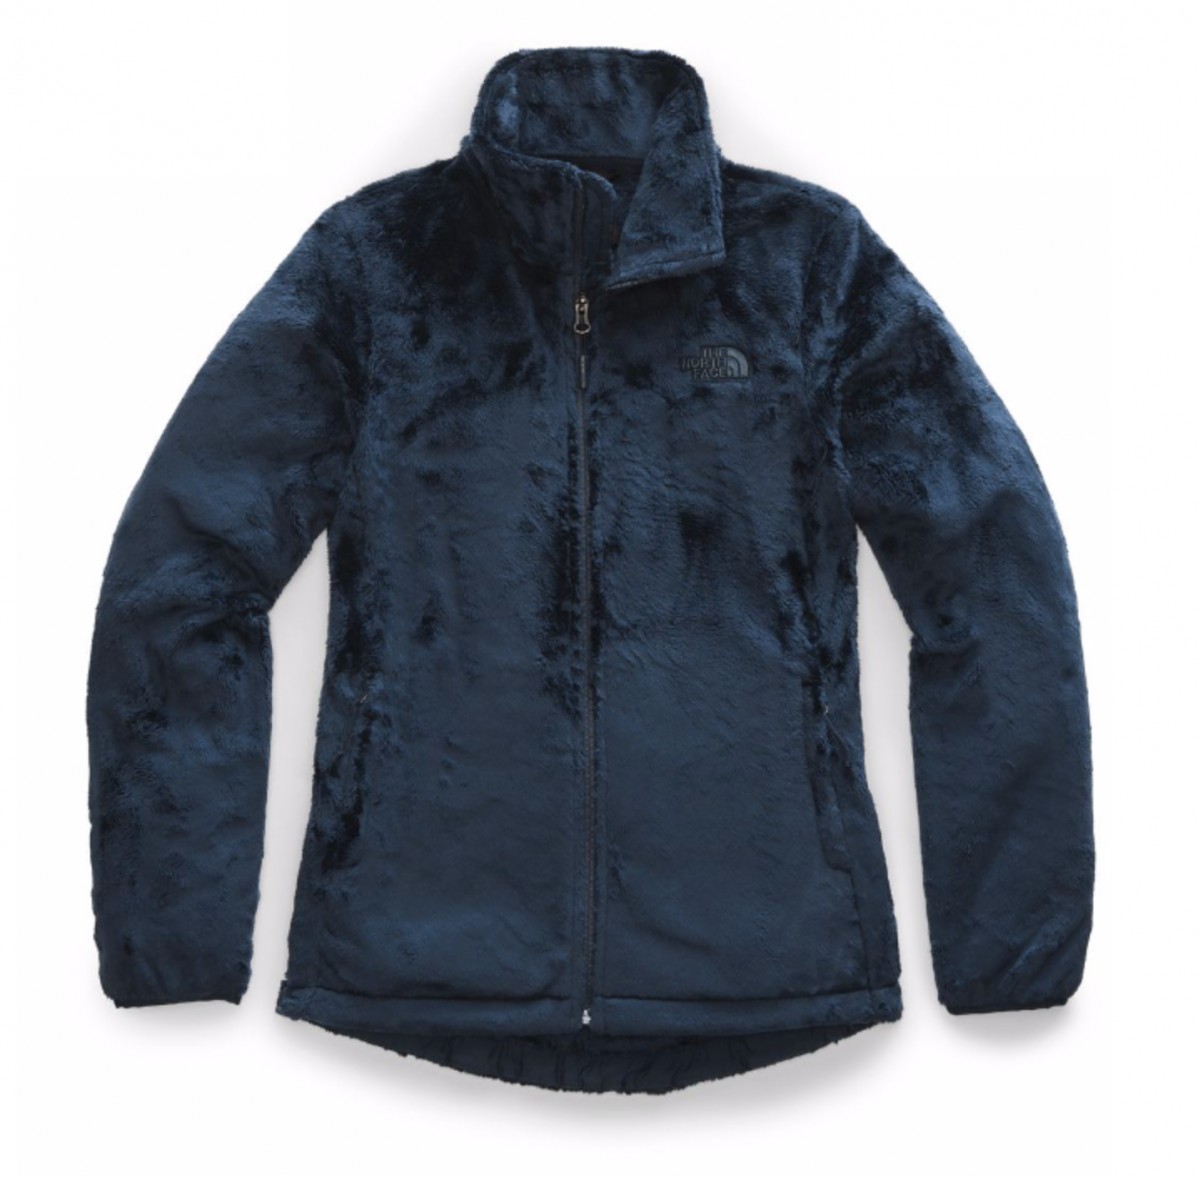 The North Face Osito Jacket  Jackets, North face women, Clothes